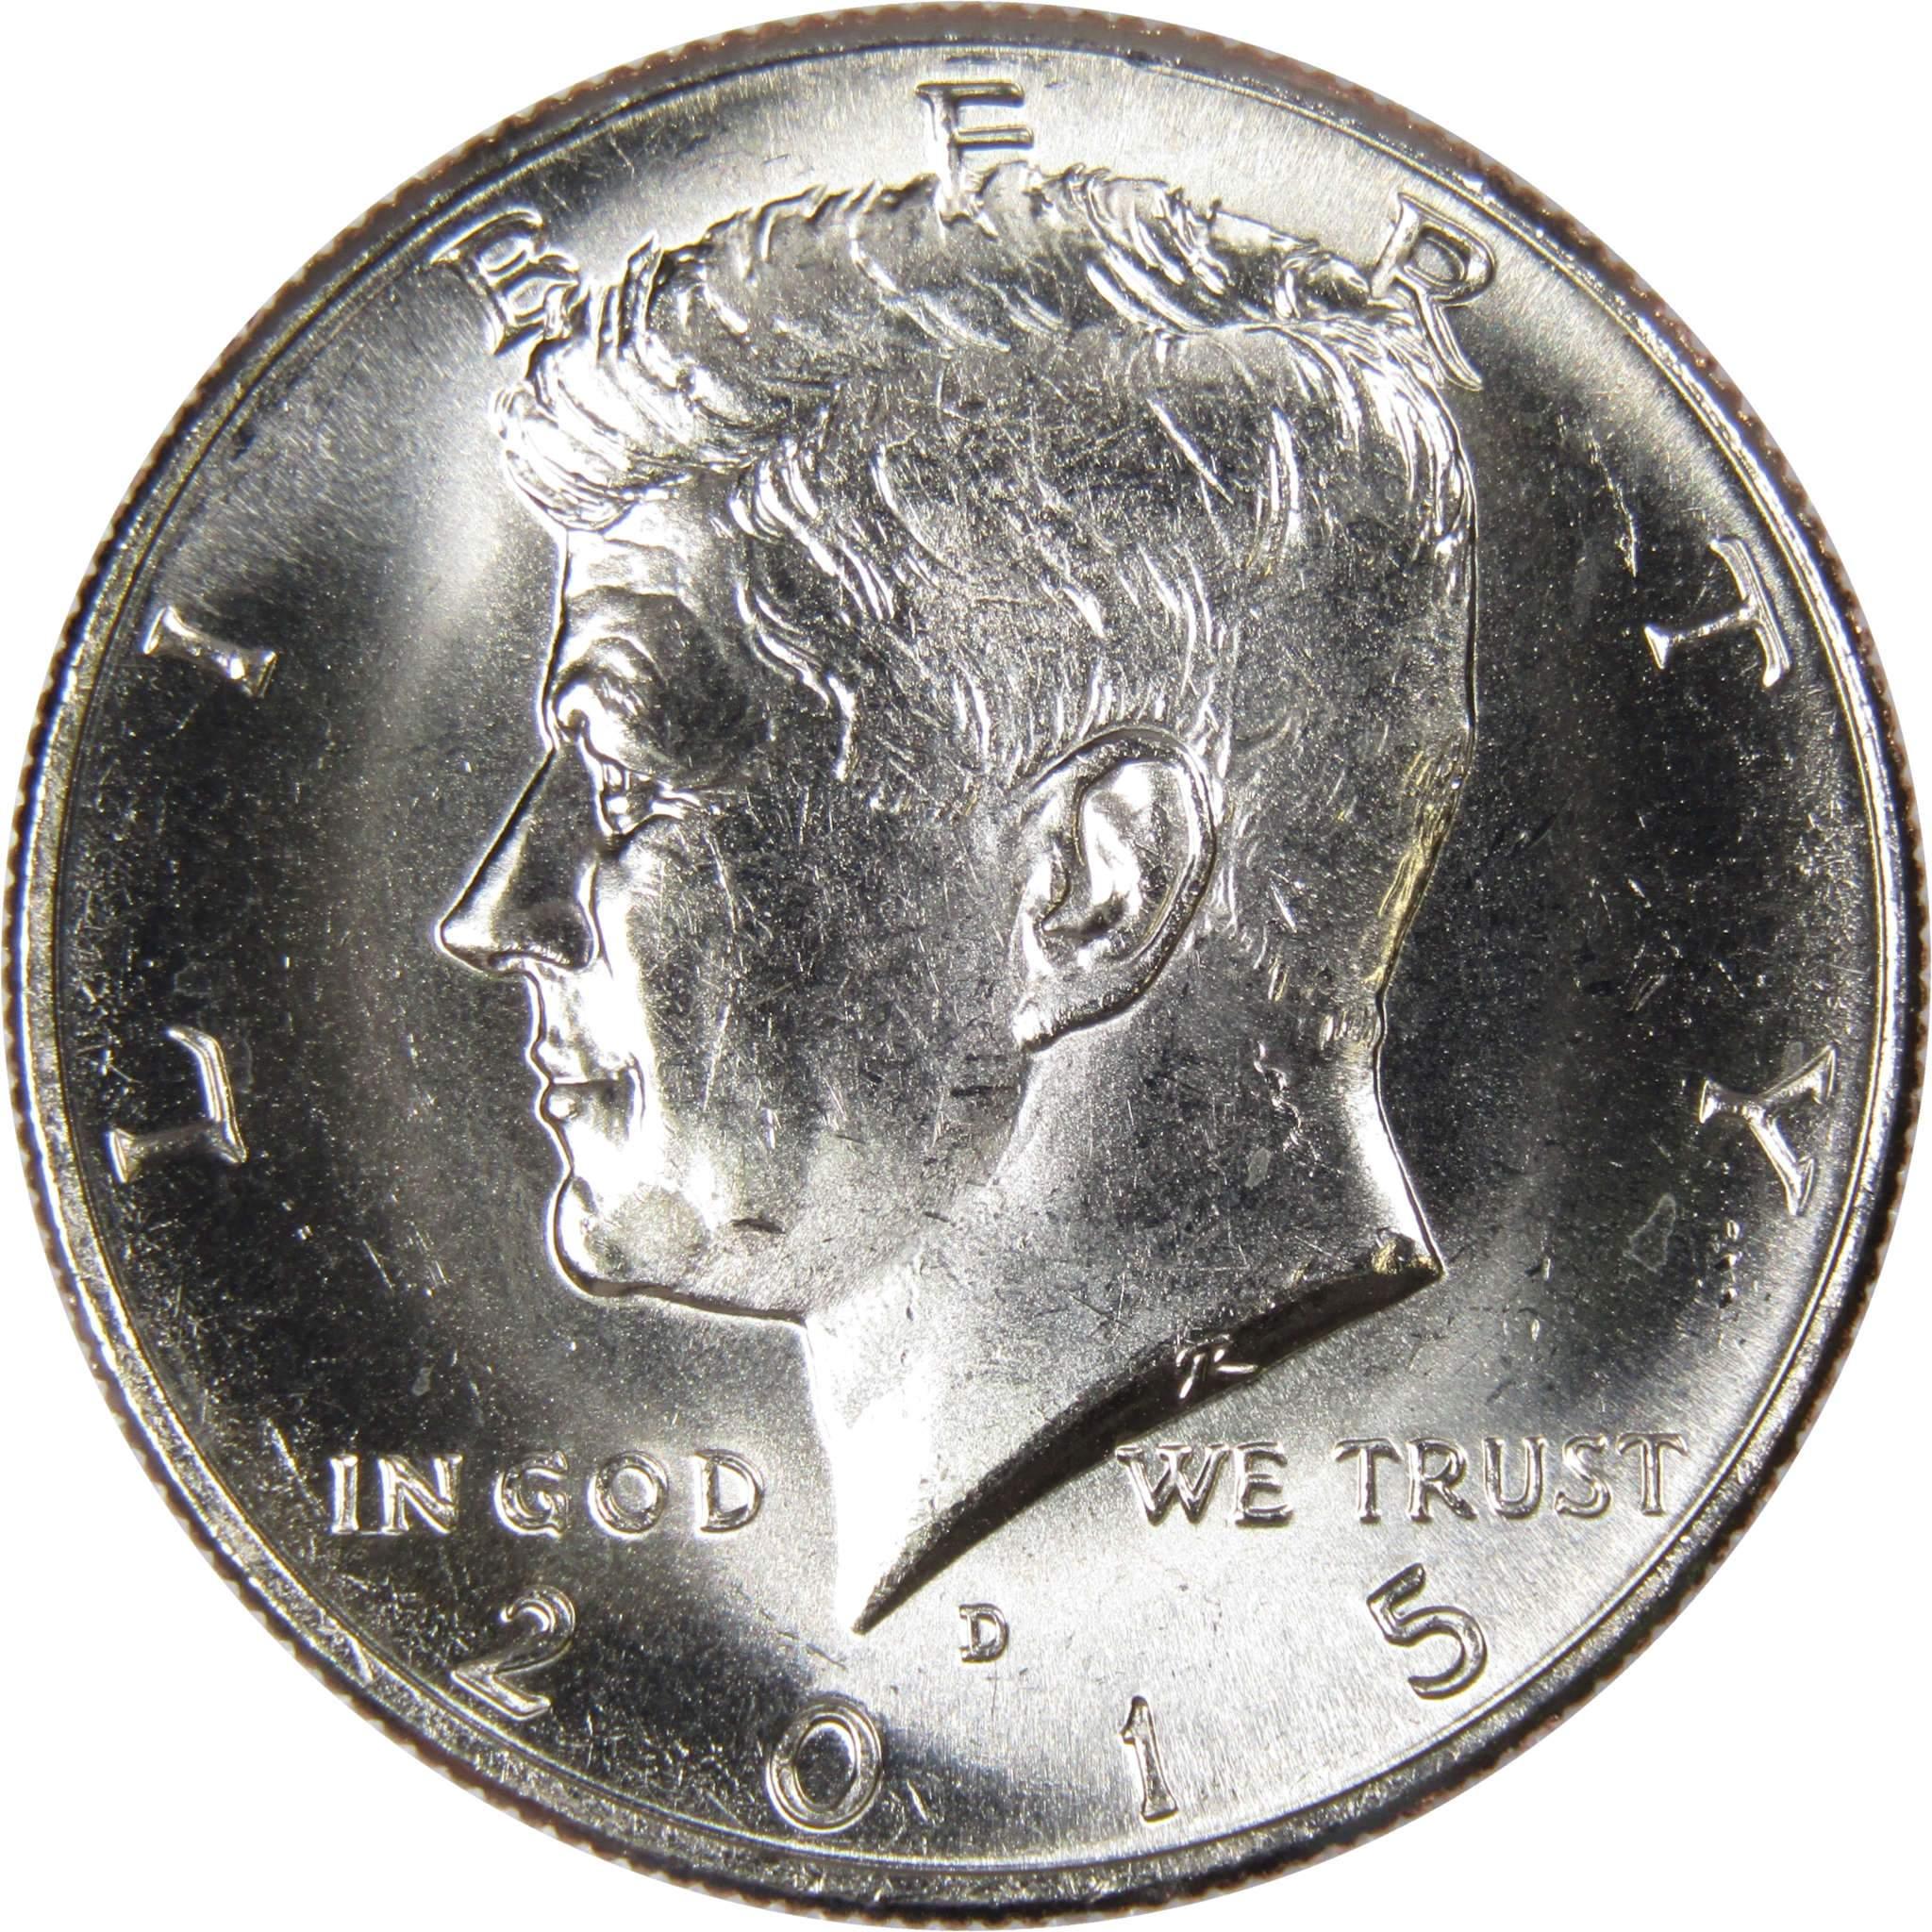 2015 D Kennedy Half Dollar BU Uncirculated Mint State 50c US Coin Collectible